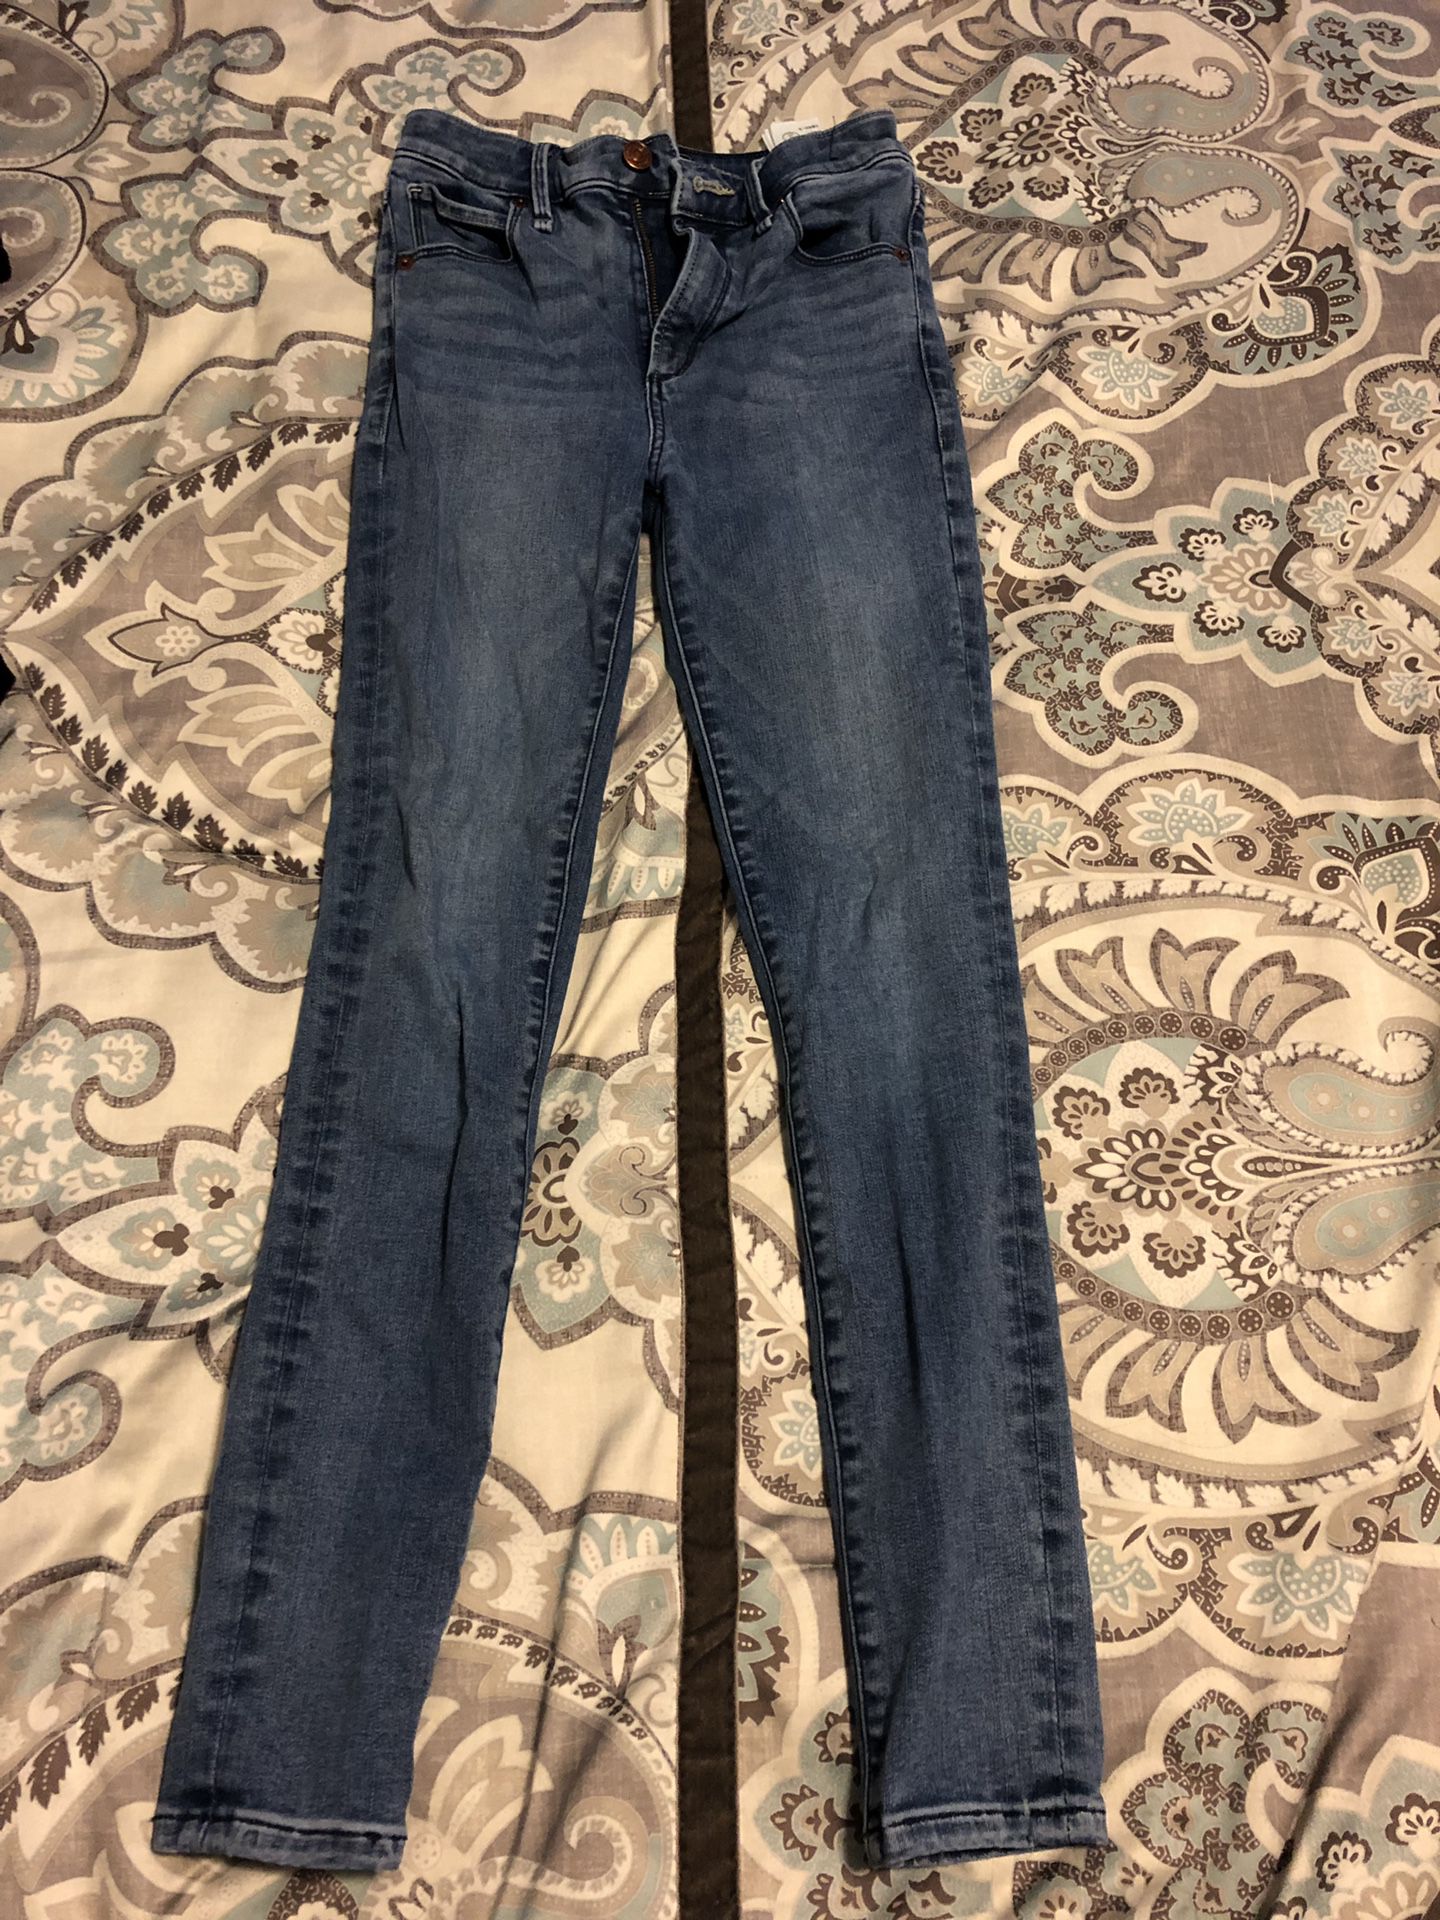 Women’s - size OO (24) - Abercrombie & Fitch